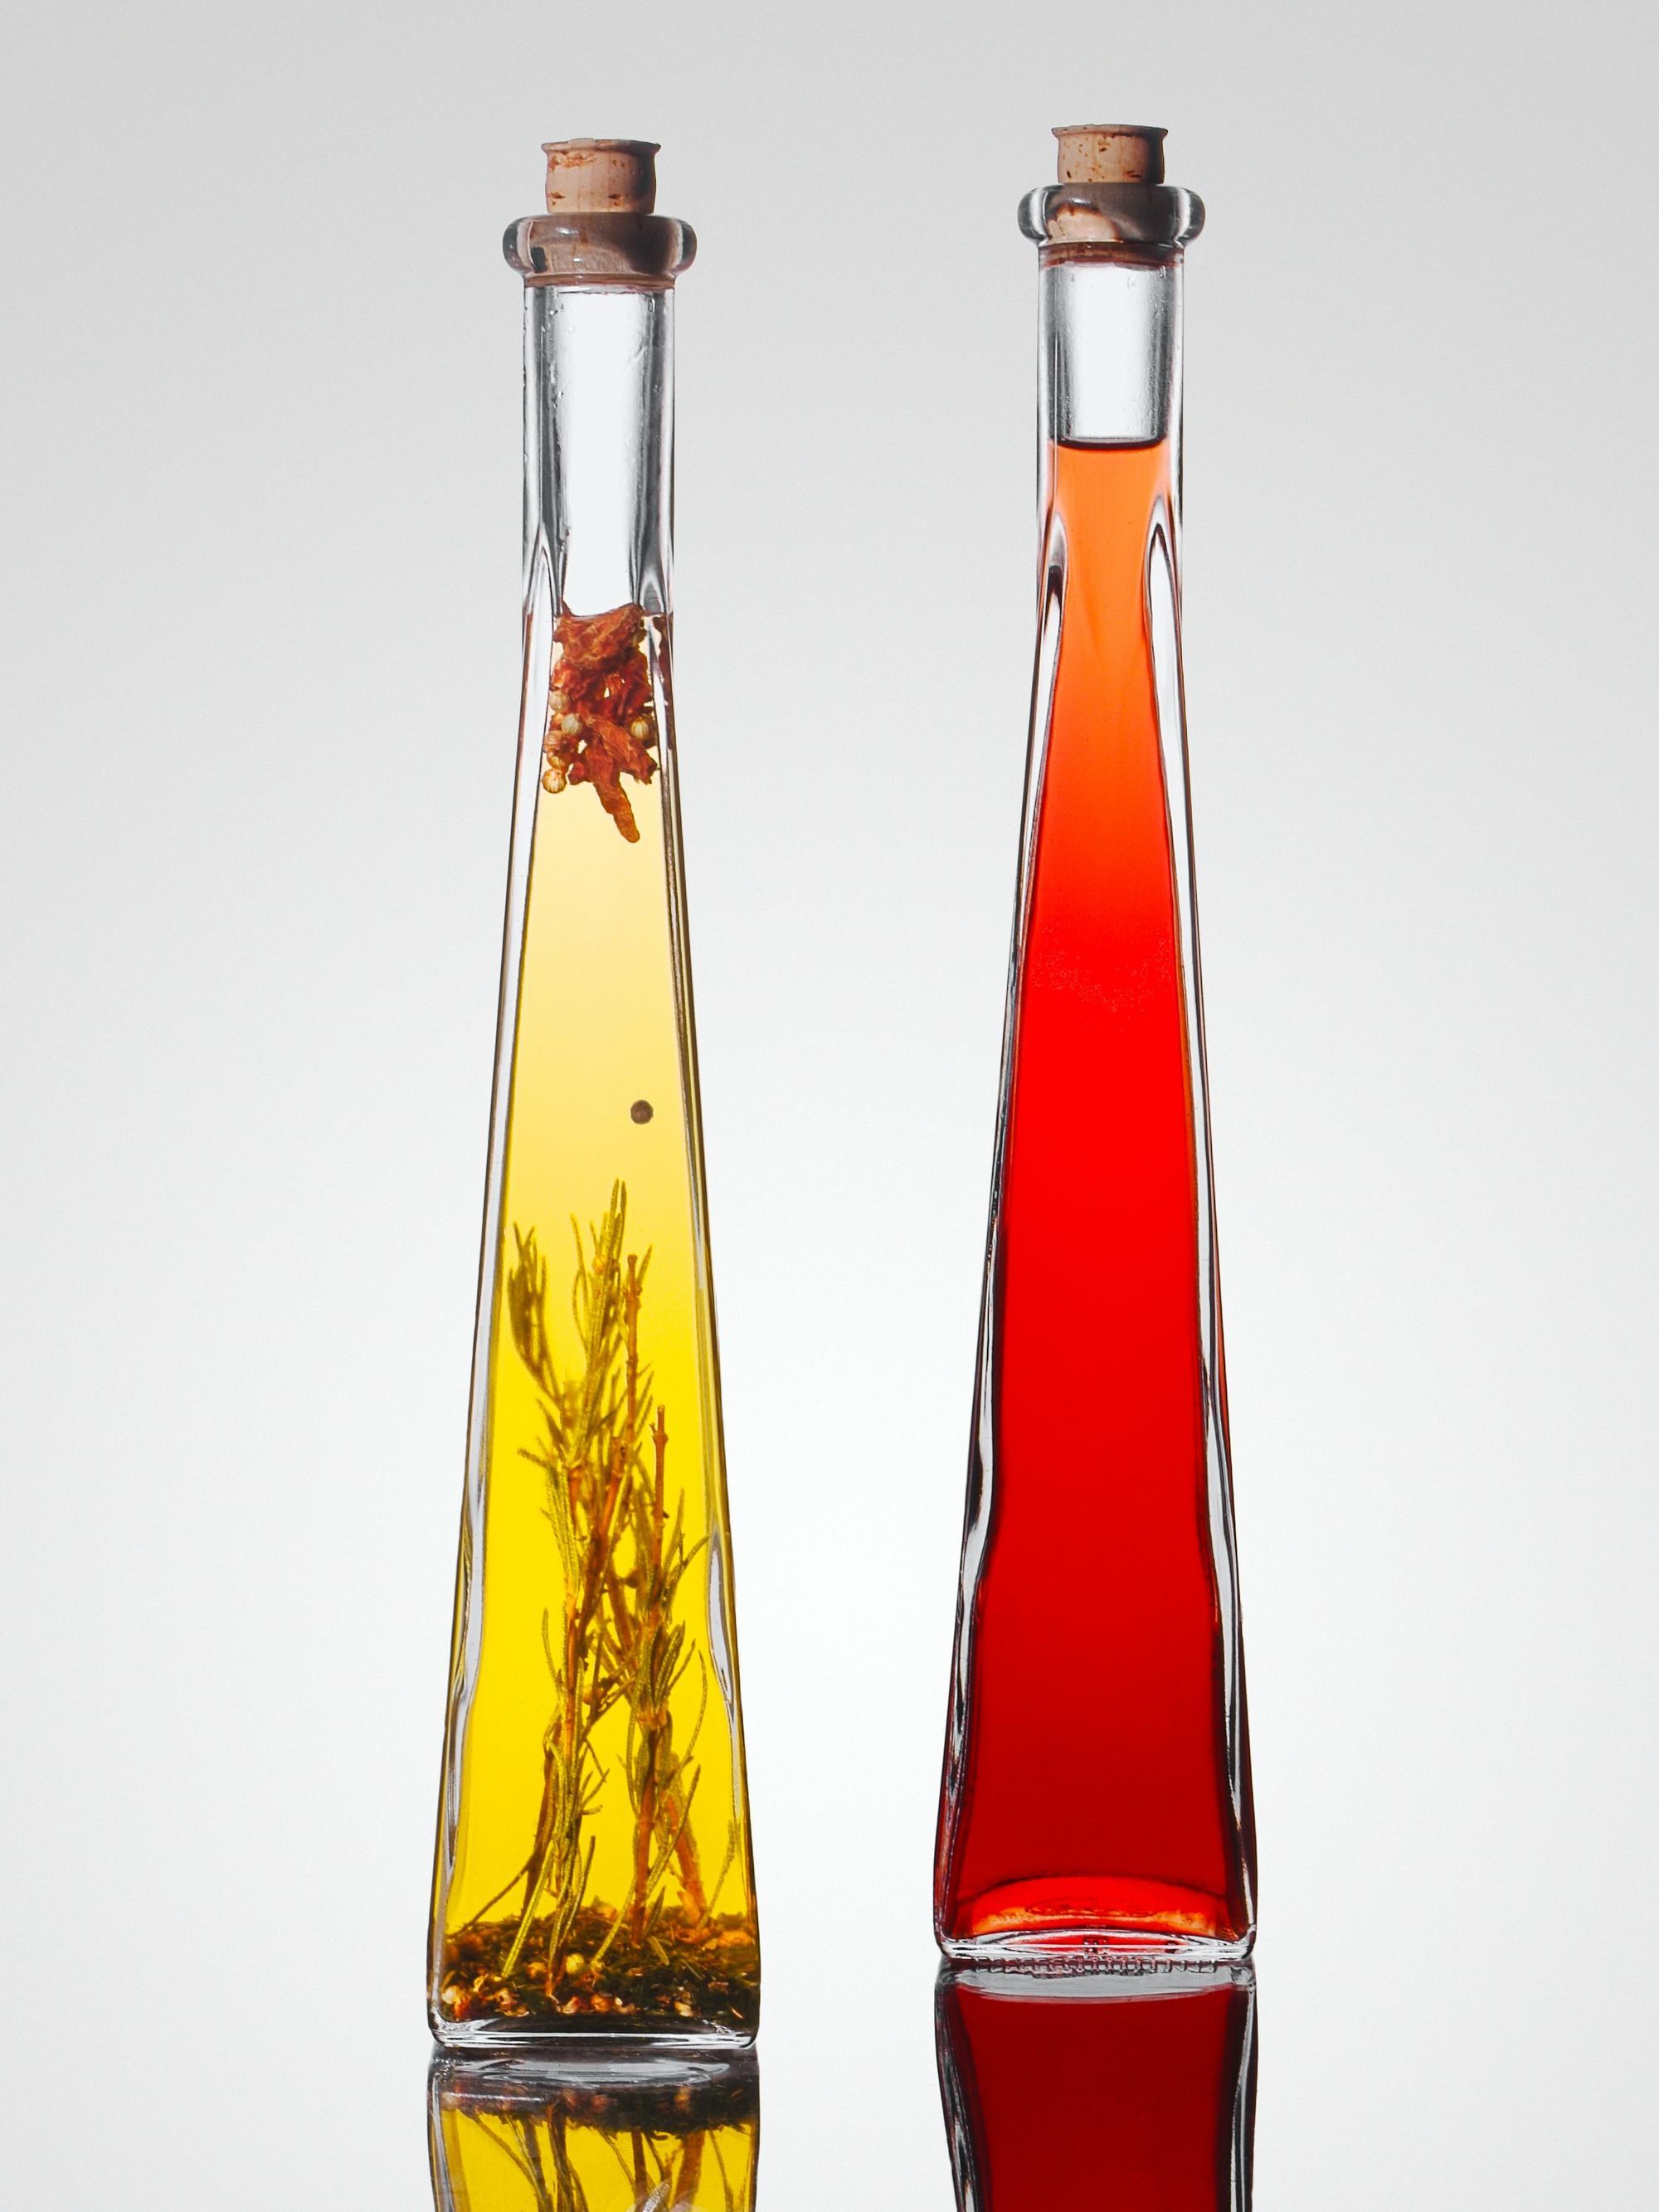 Two long, slender bottles containing liquids, one yellow with herbs visible inside; the other red with no additions.